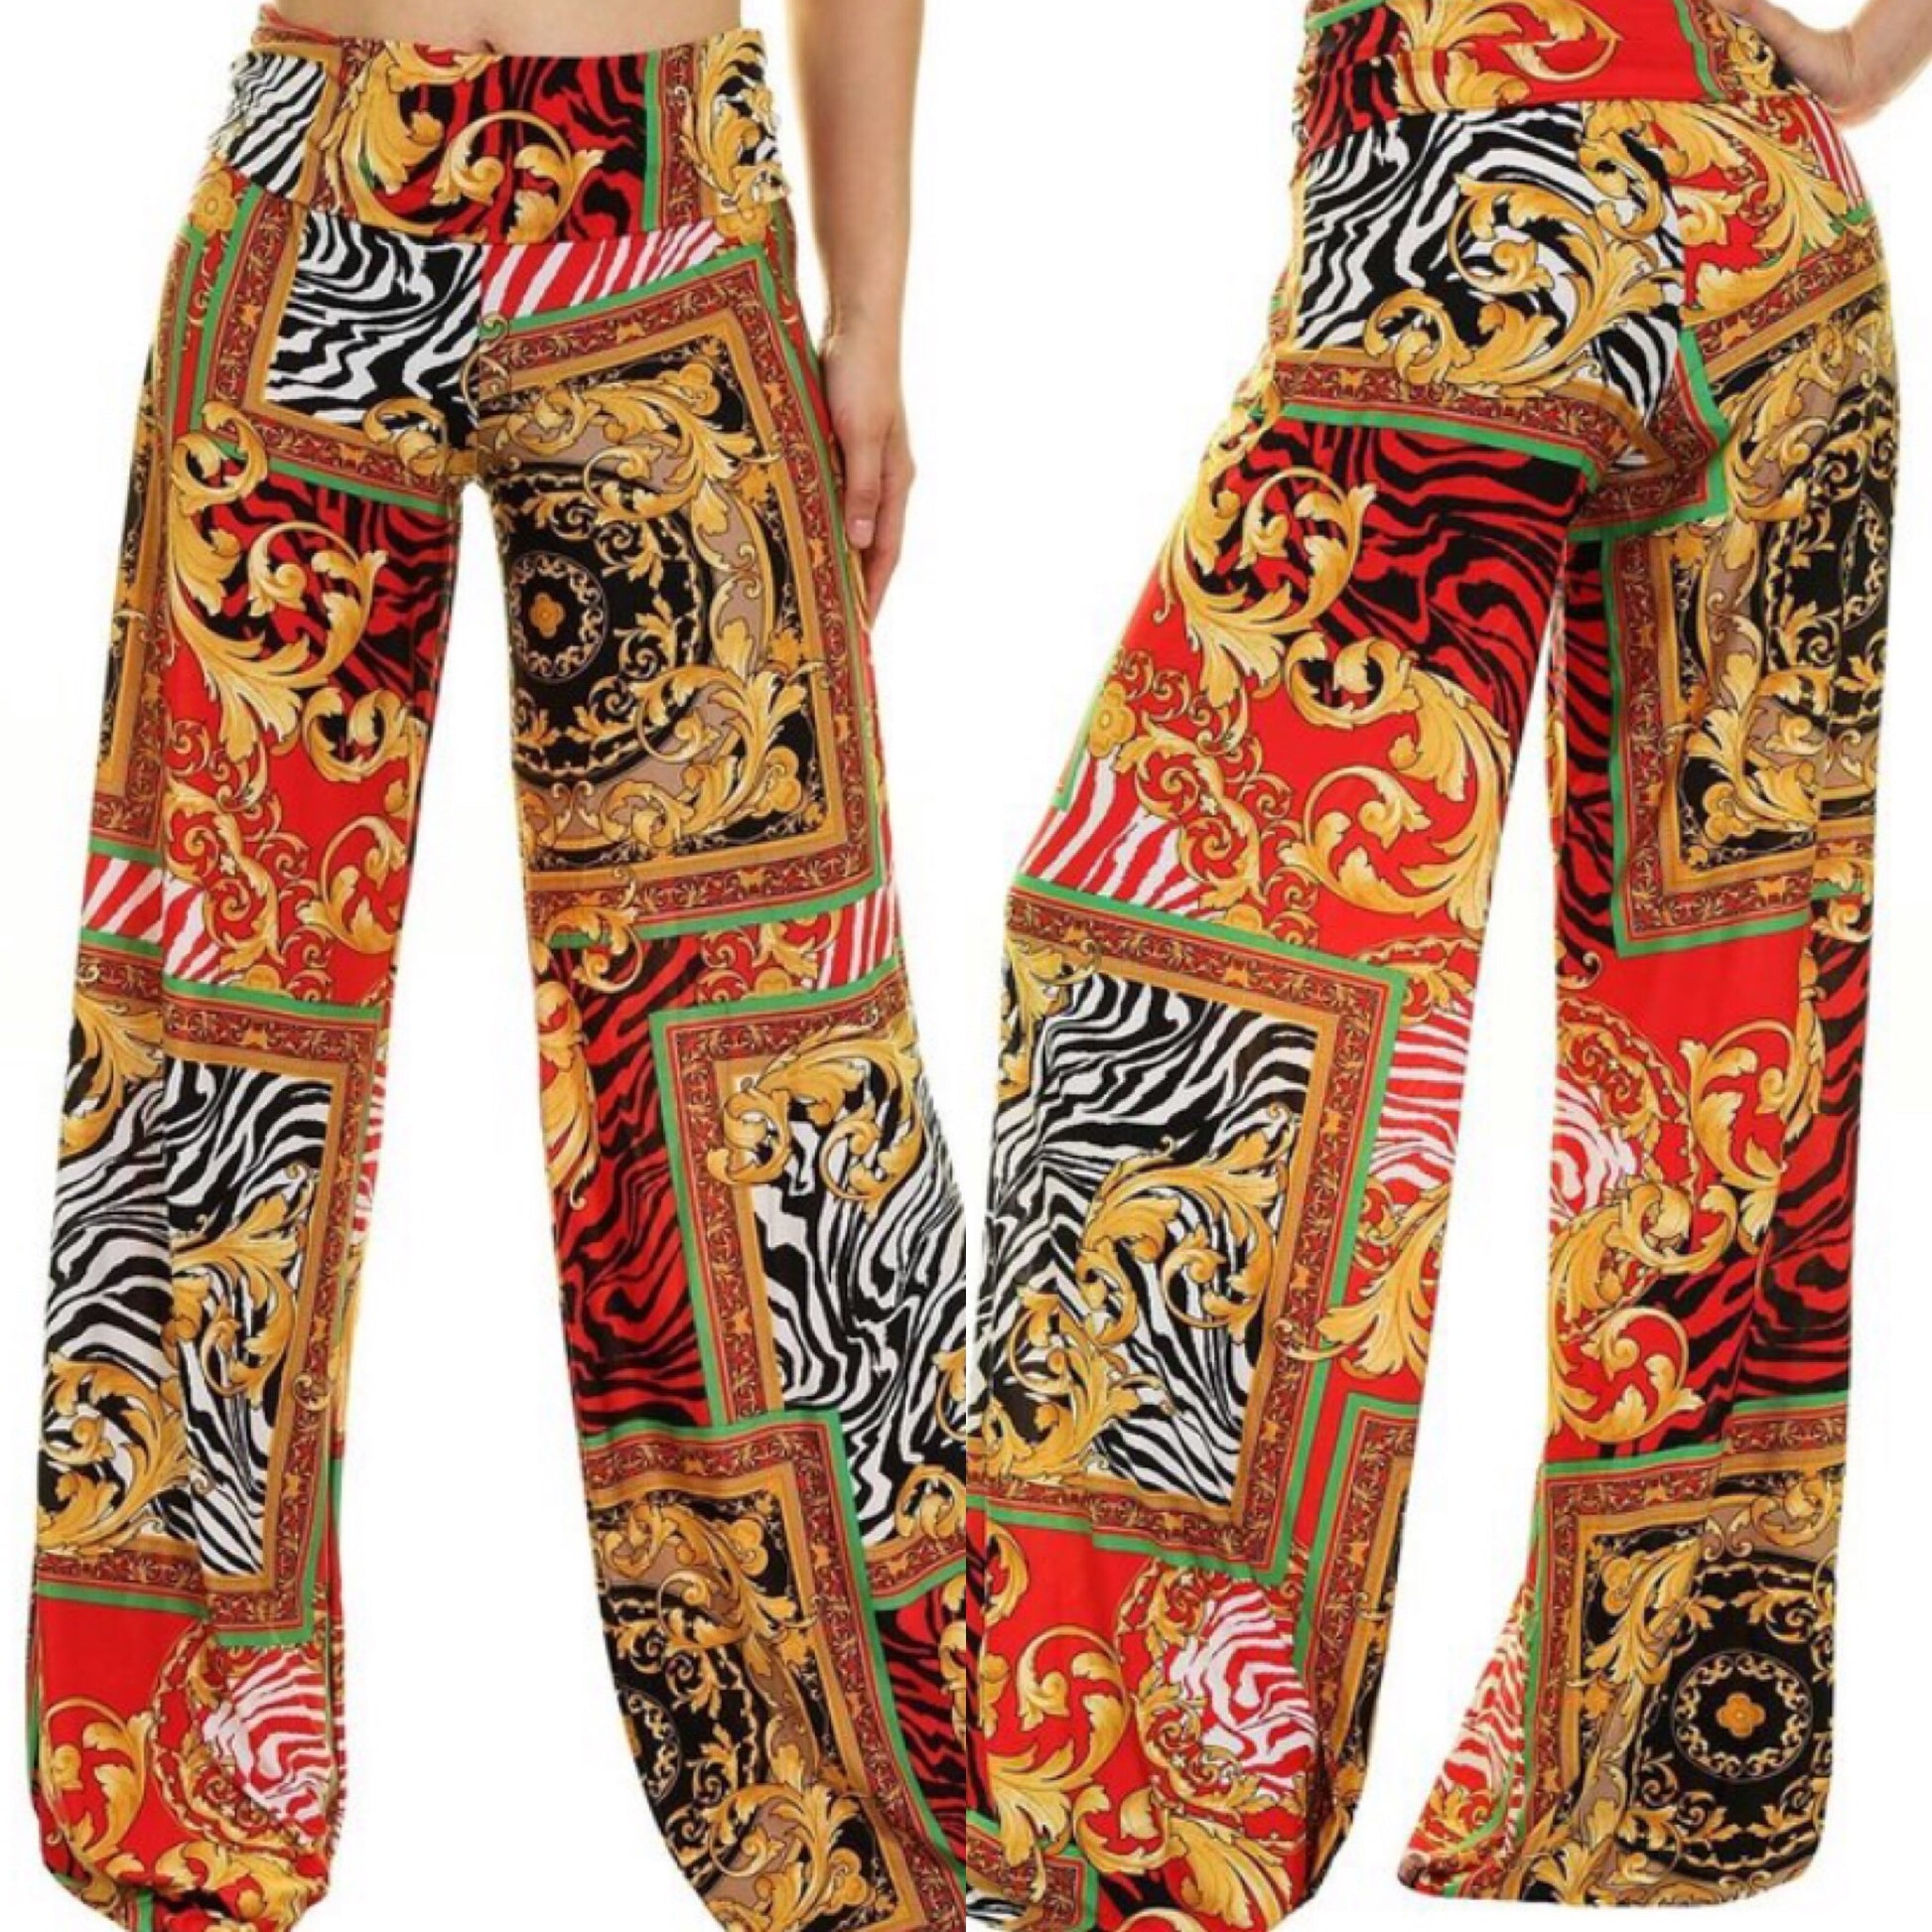 Play More Popping Palazzo Pants - TRUE. 